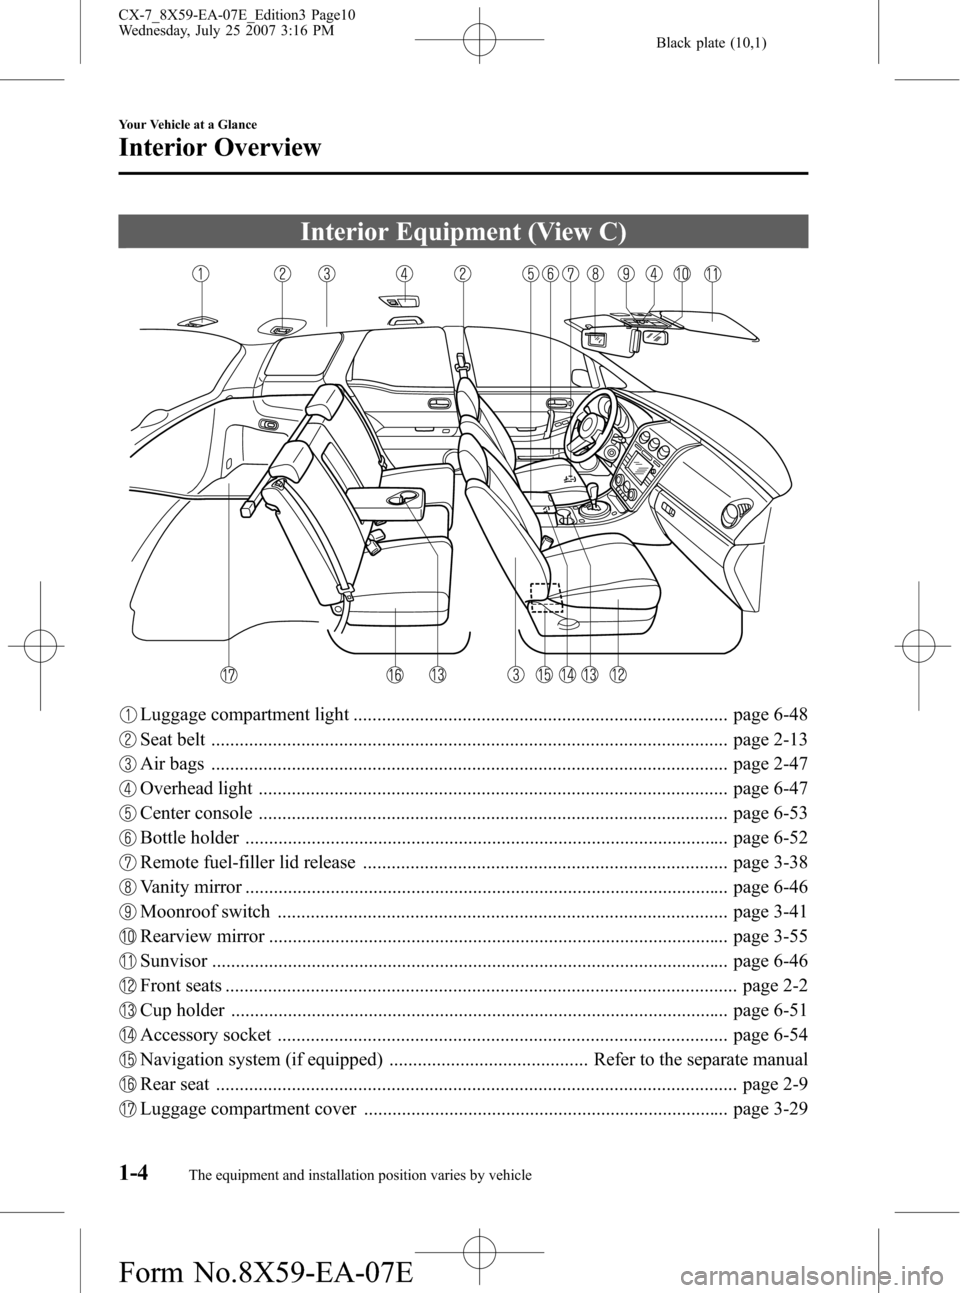 MAZDA MODEL CX-7 2008  Owners Manual (in English) Black plate (10,1)
Interior Equipment (View C)
Luggage compartment light ............................................................................... page 6-48
Seat belt ...........................